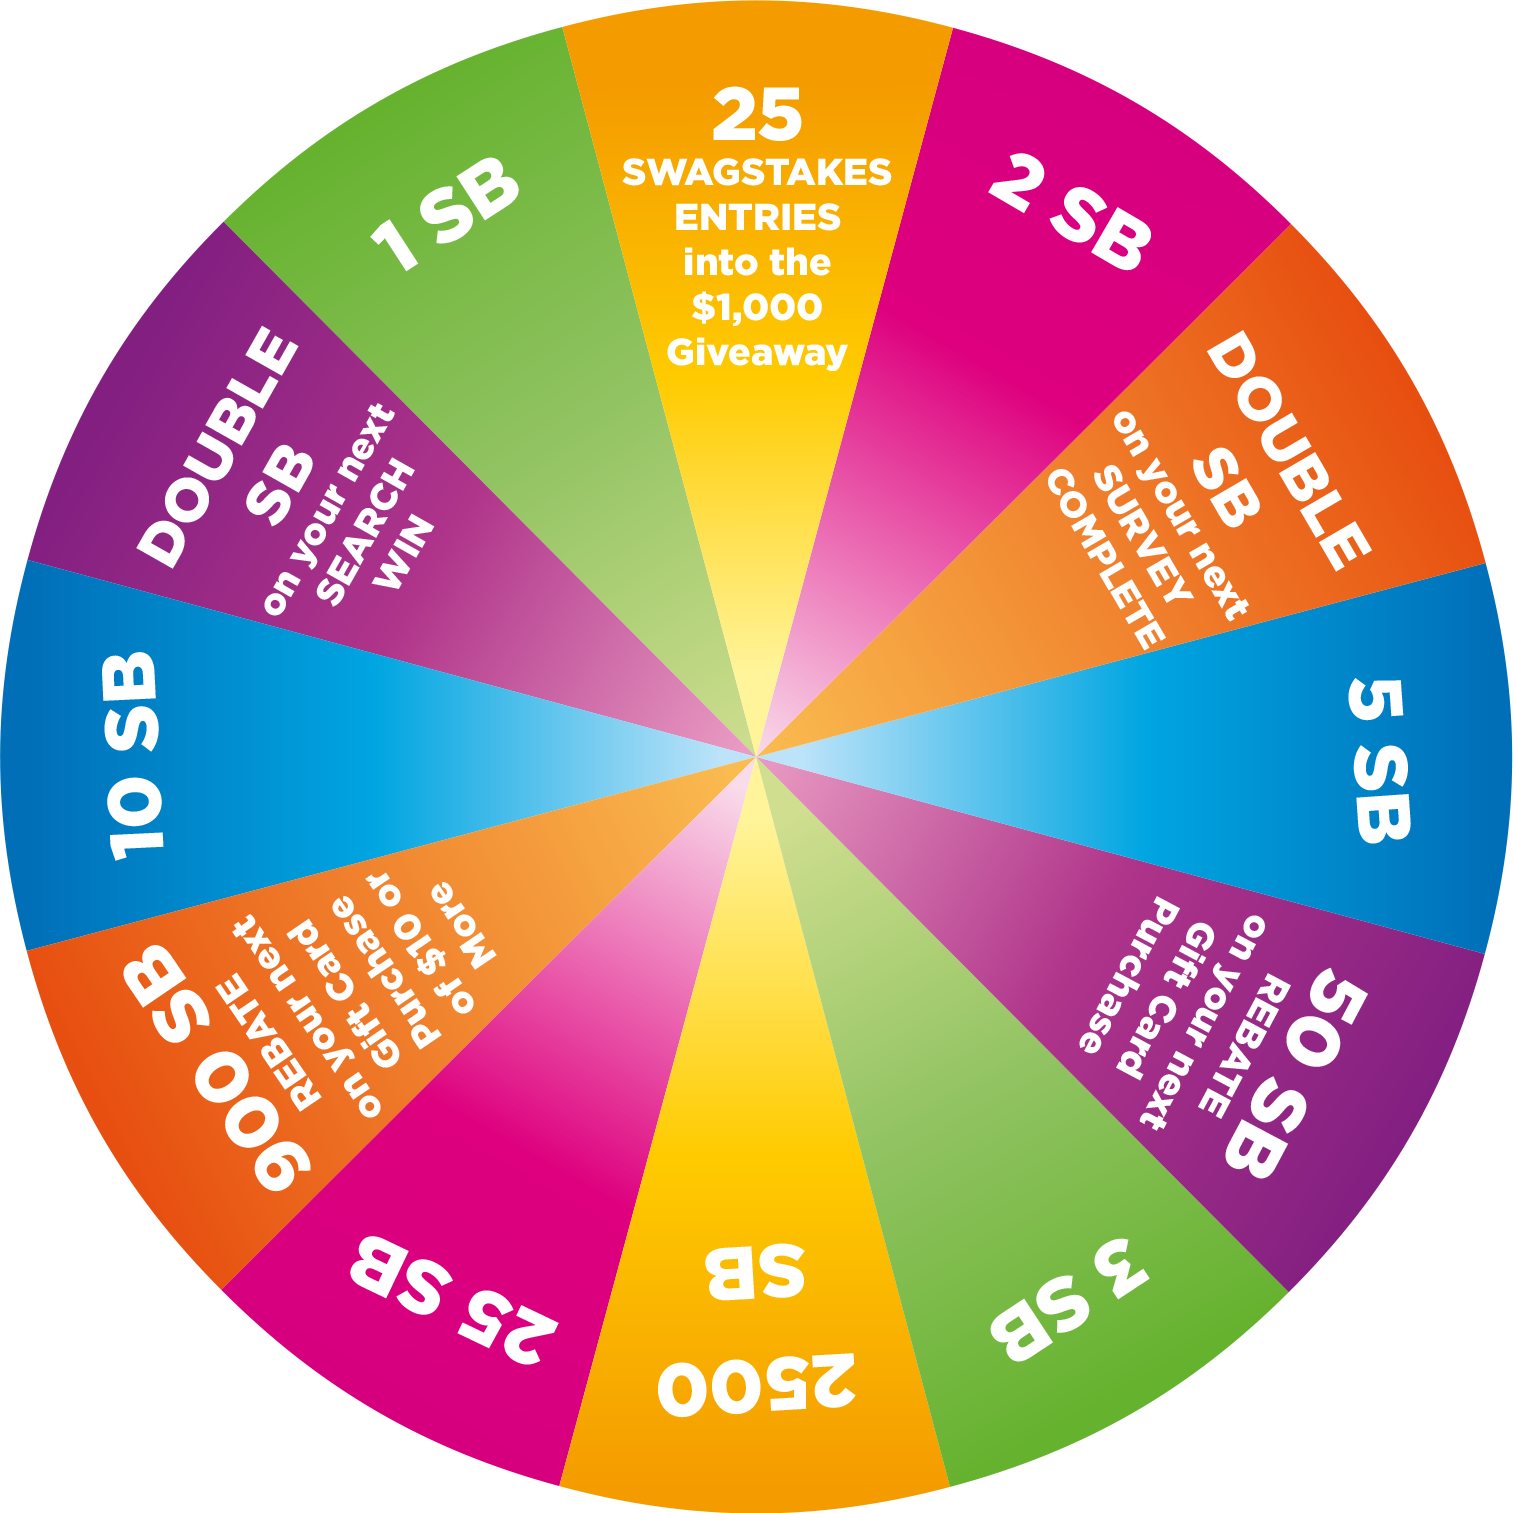 Swagbucks.com Spin & Win. Spin the wheel to win SB and other awards.